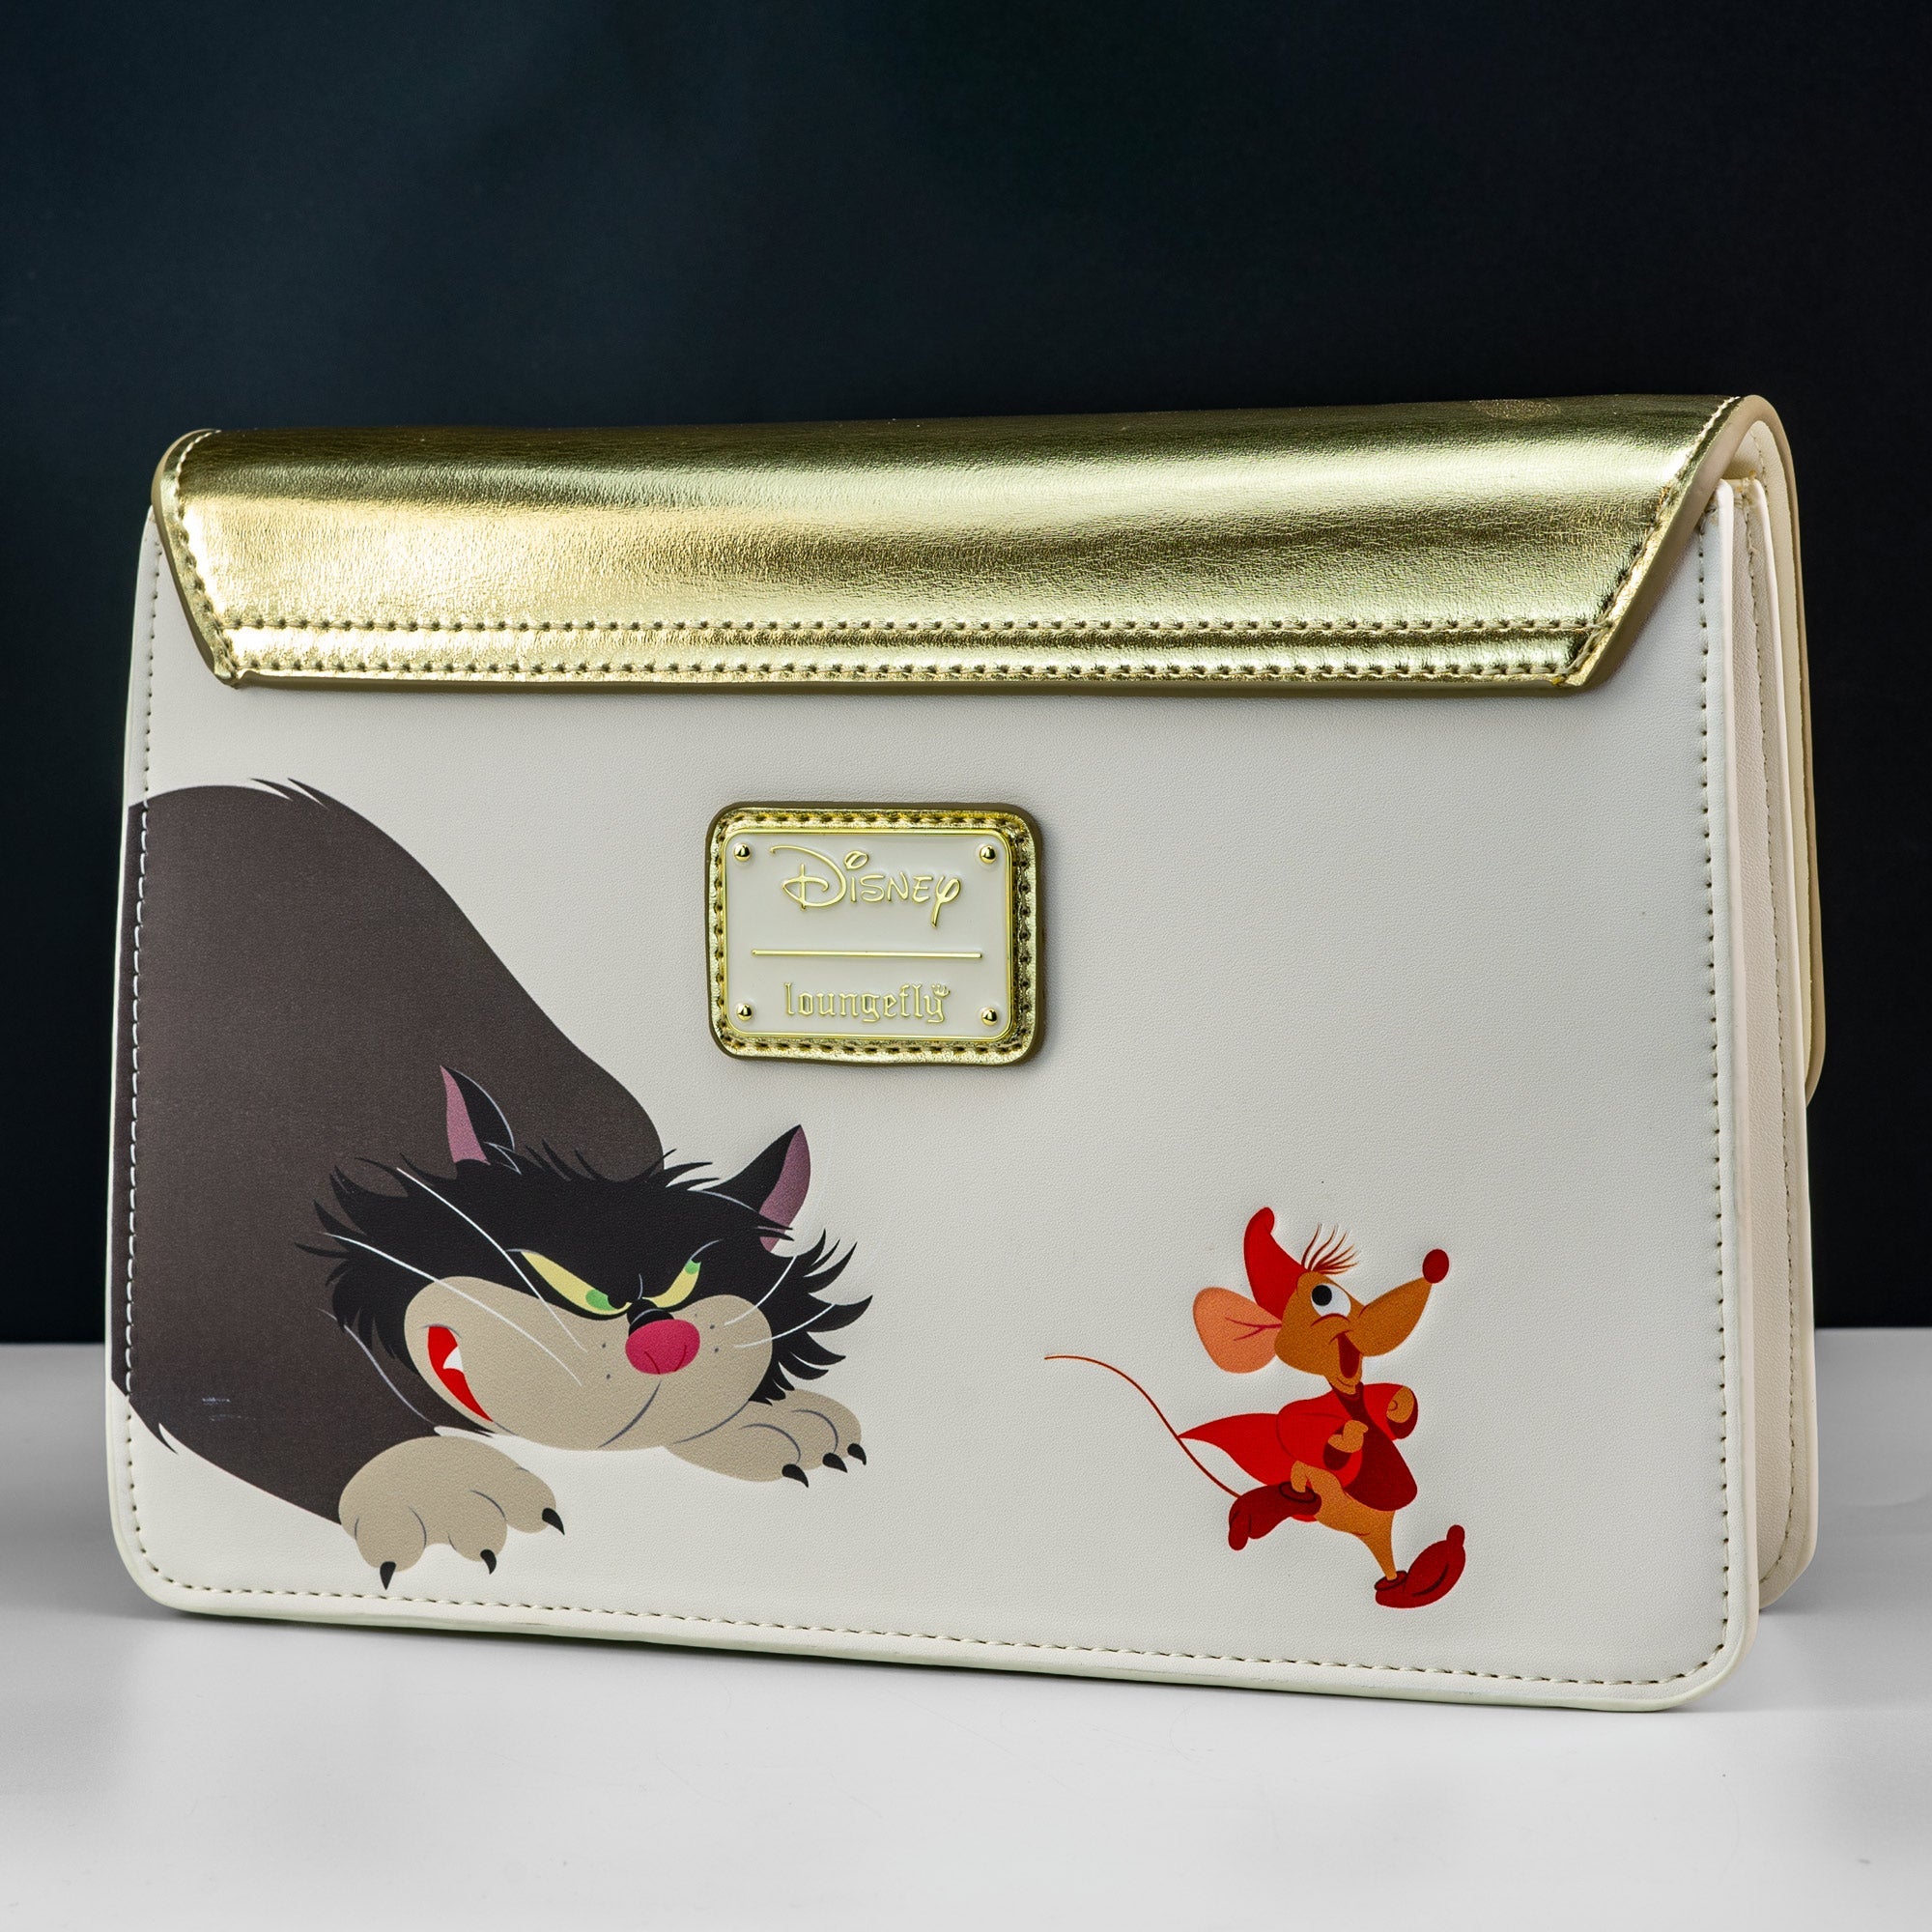 Loungefly x Disney Cinderella Lucifer Jaq and Gus Teacup Gold Foil Crossbody Bag - GeekCore